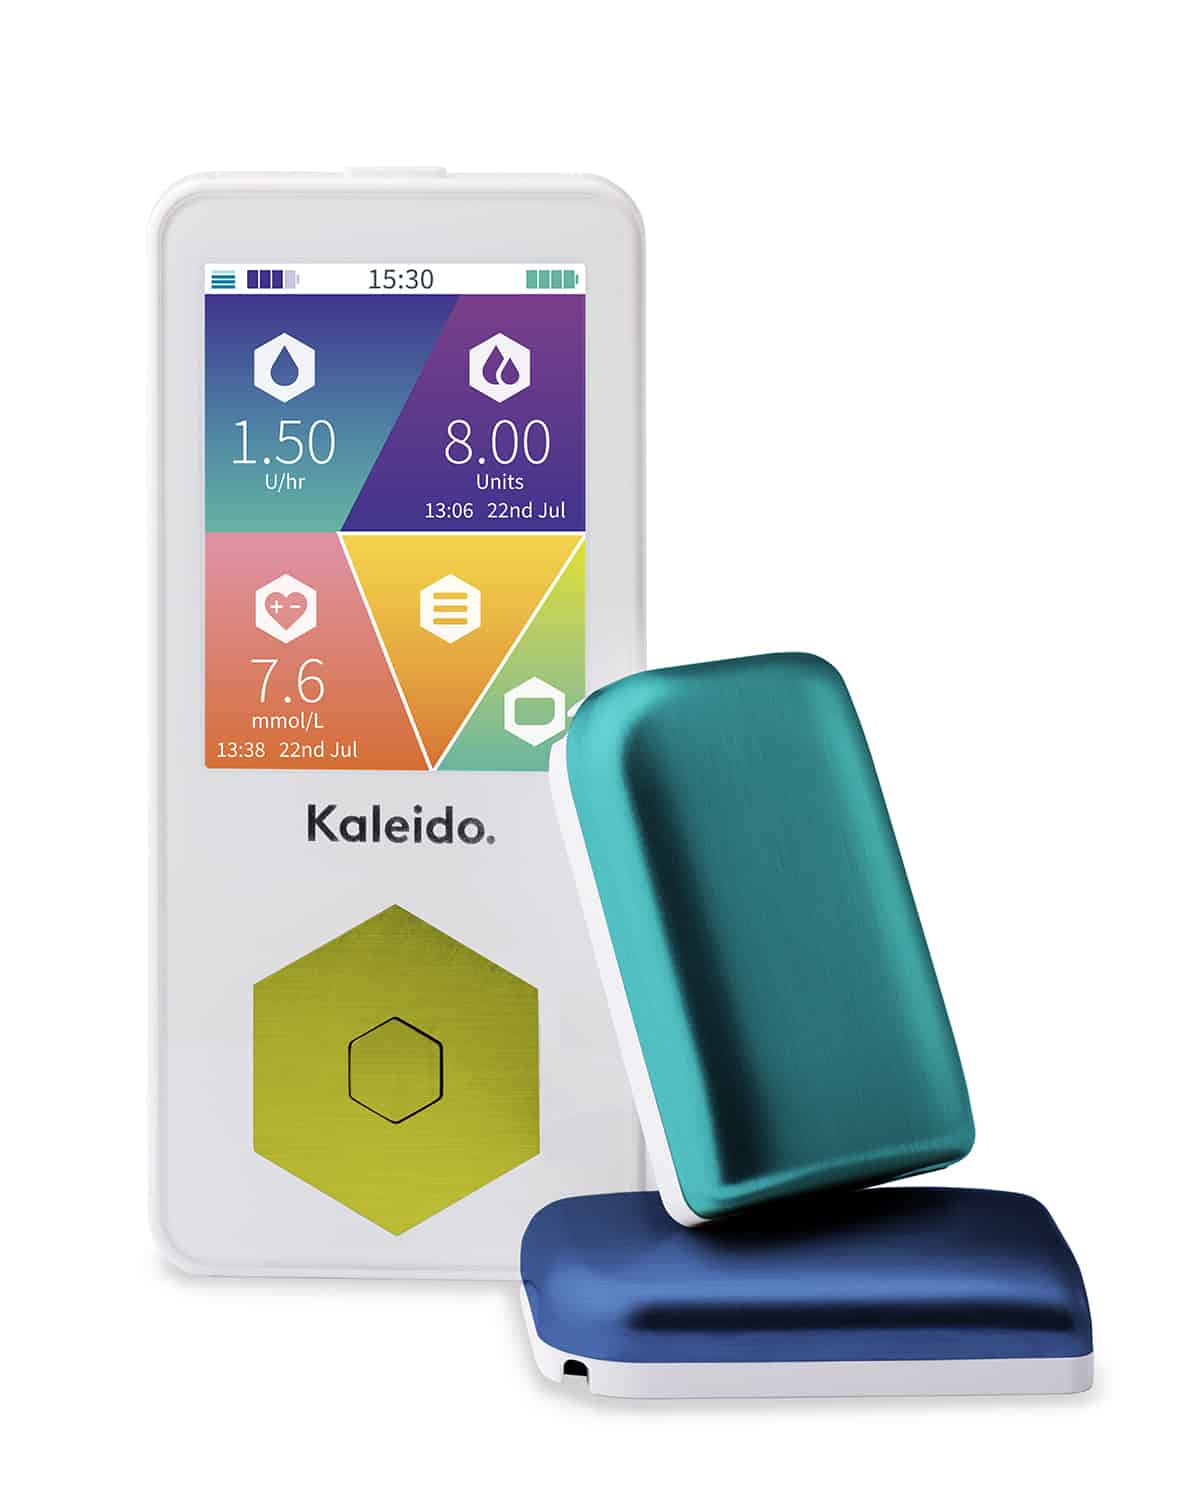 Kaleido Launches HCL System With Diabeloop & Dexcom